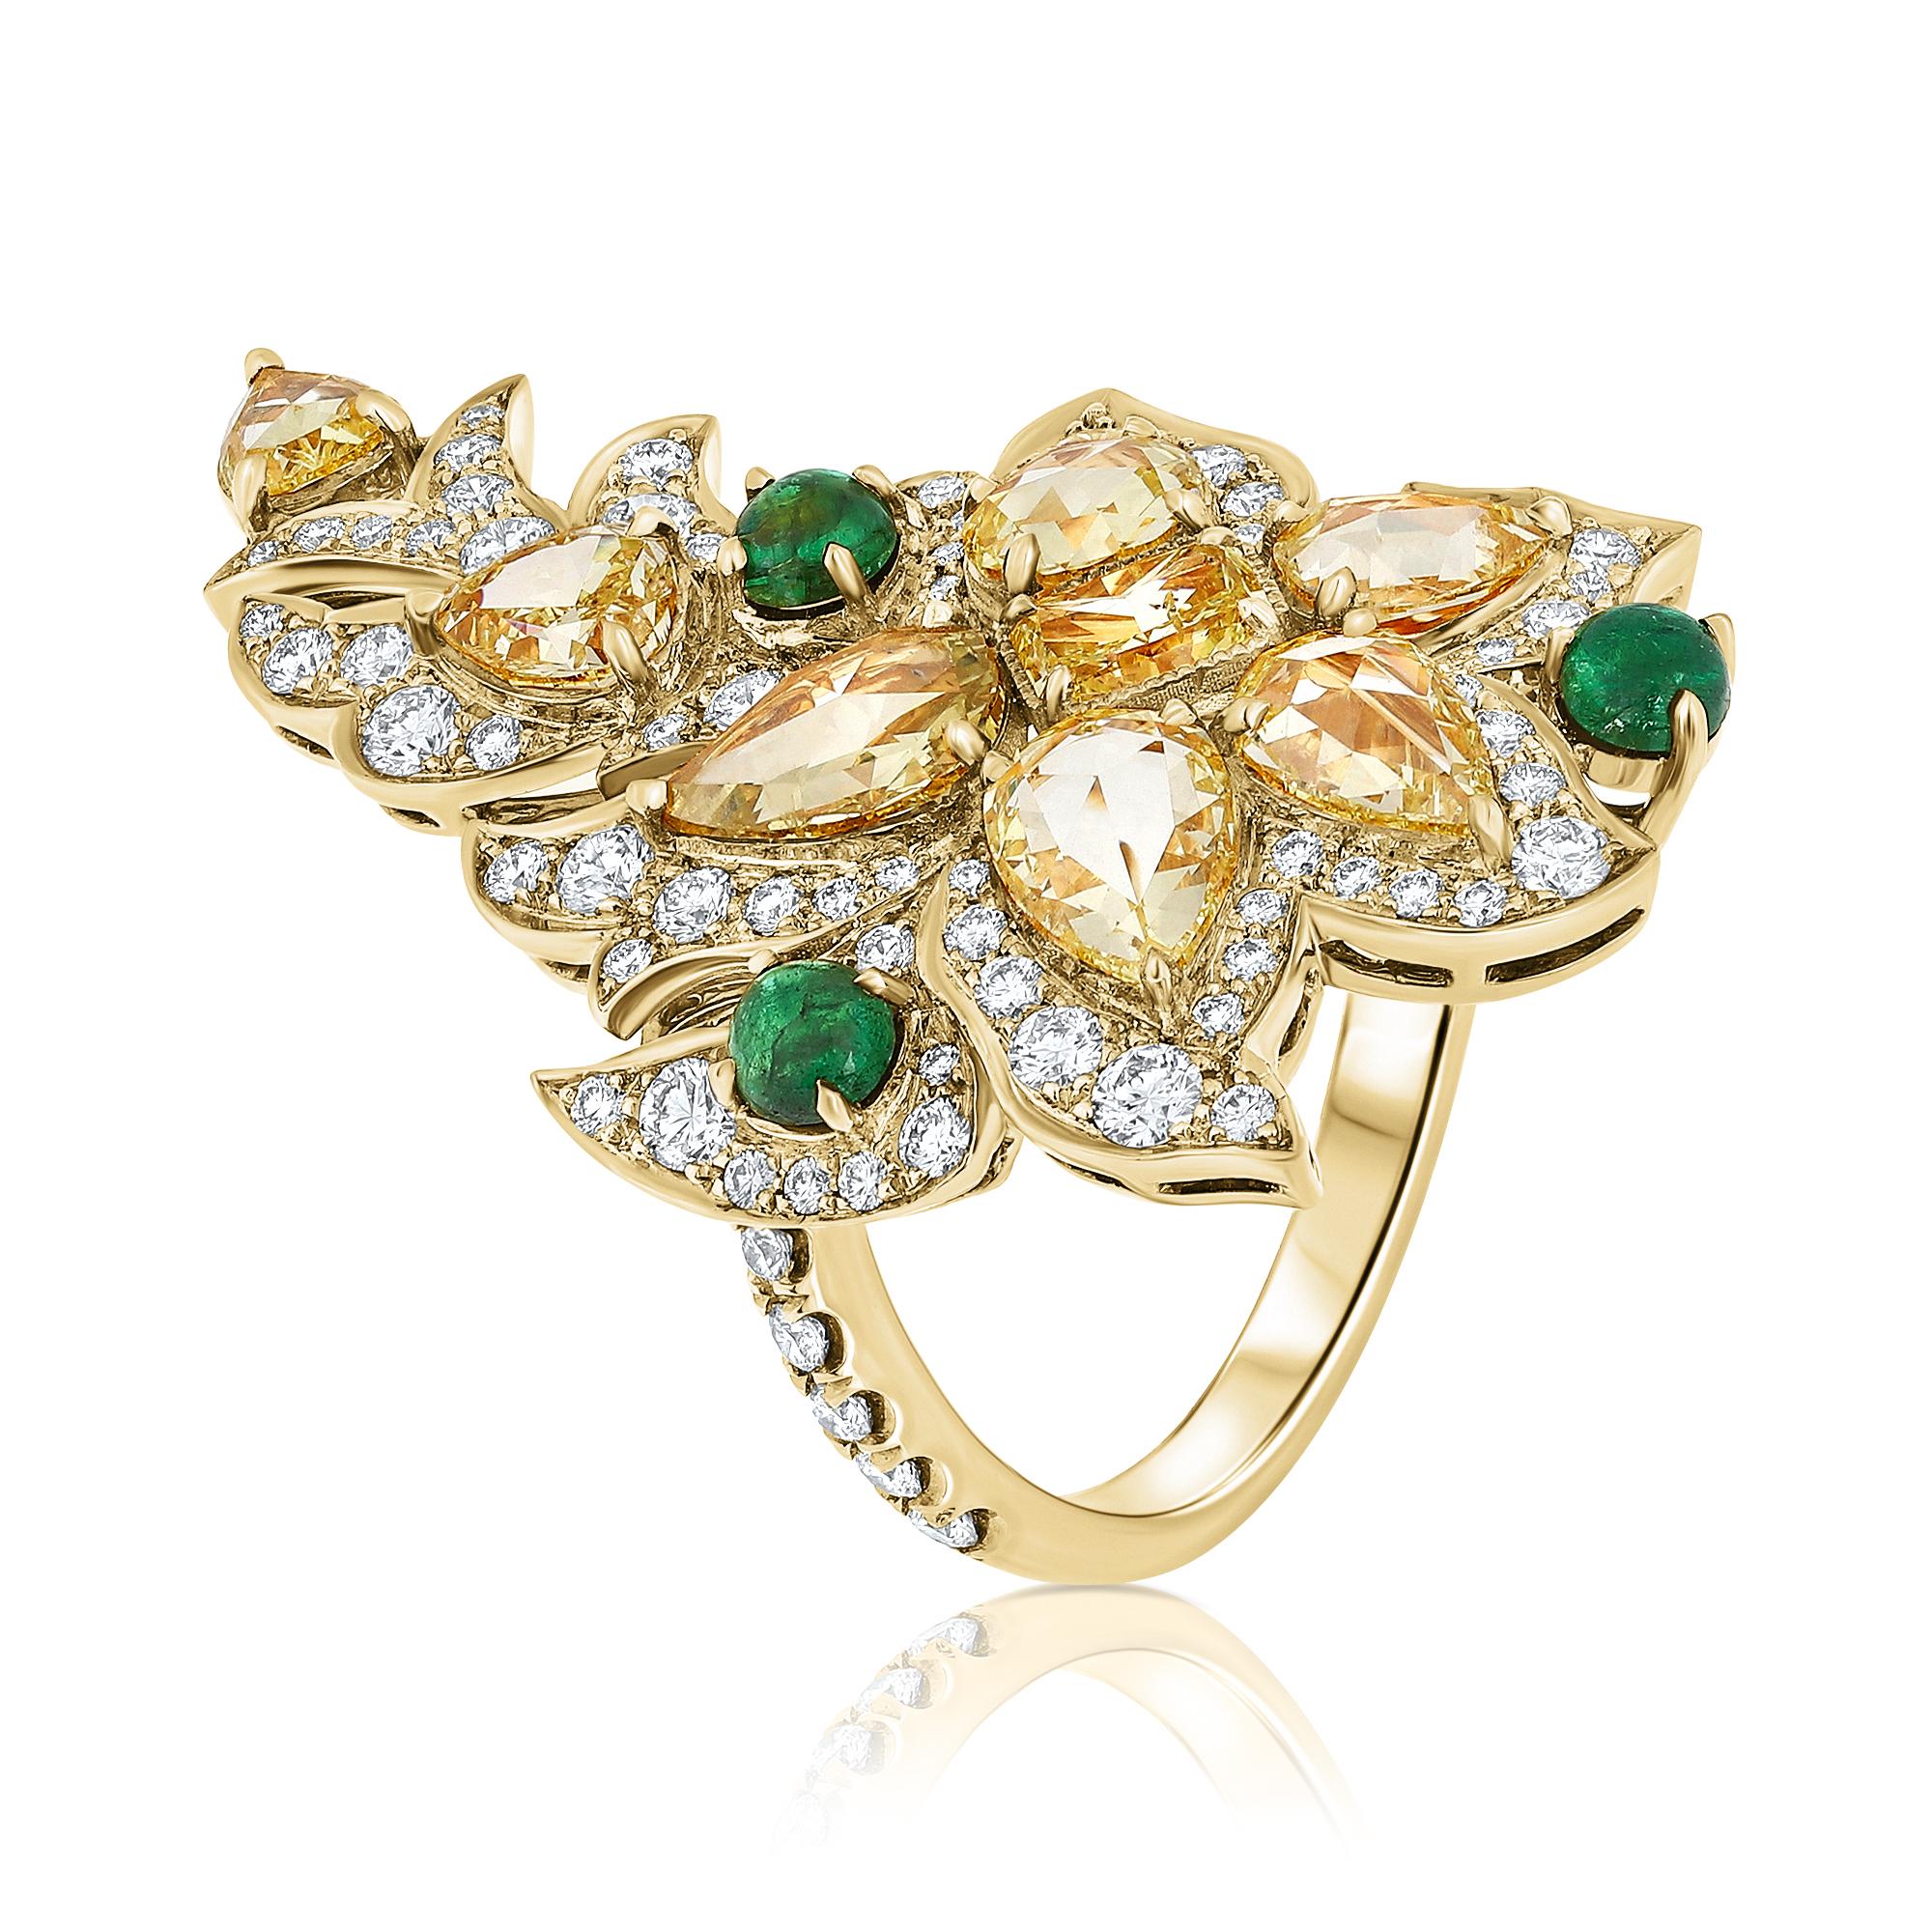 A Exquisite Art Nouveau-Inspired Cocktail-Cluster Ring featuring a captivating blend of a 4.14 Carat Fancy Yellow Mix-Shaped Diamond and a 1.4 Carat F-G Color, VS Clarity Colorless Diamond, elegantly presented in a cabochon cut emerald-adorned